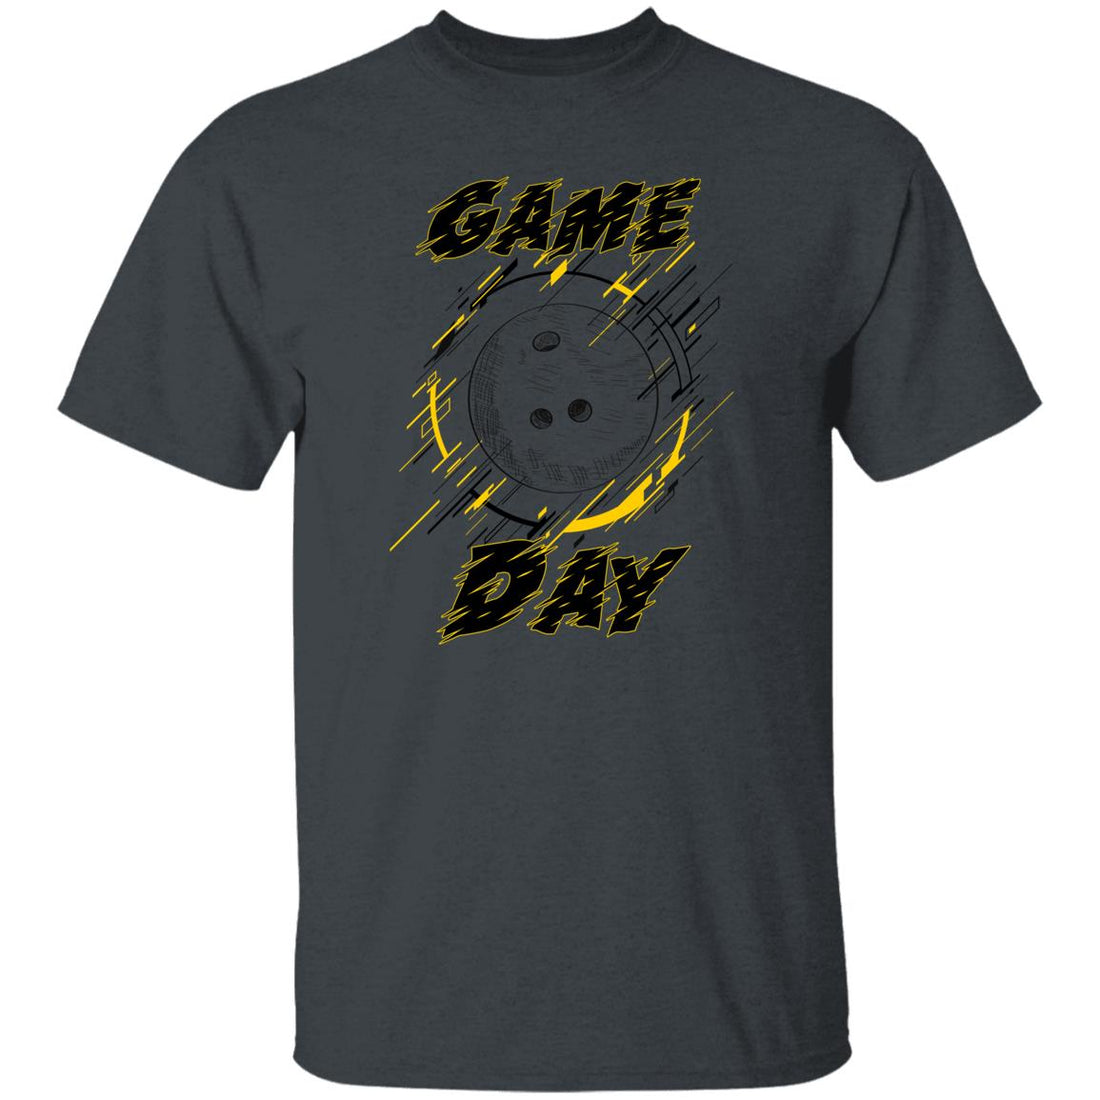 Game Day Bowling T-Shirt - T-Shirts - Positively Sassy - Game Day Bowling T-Shirt